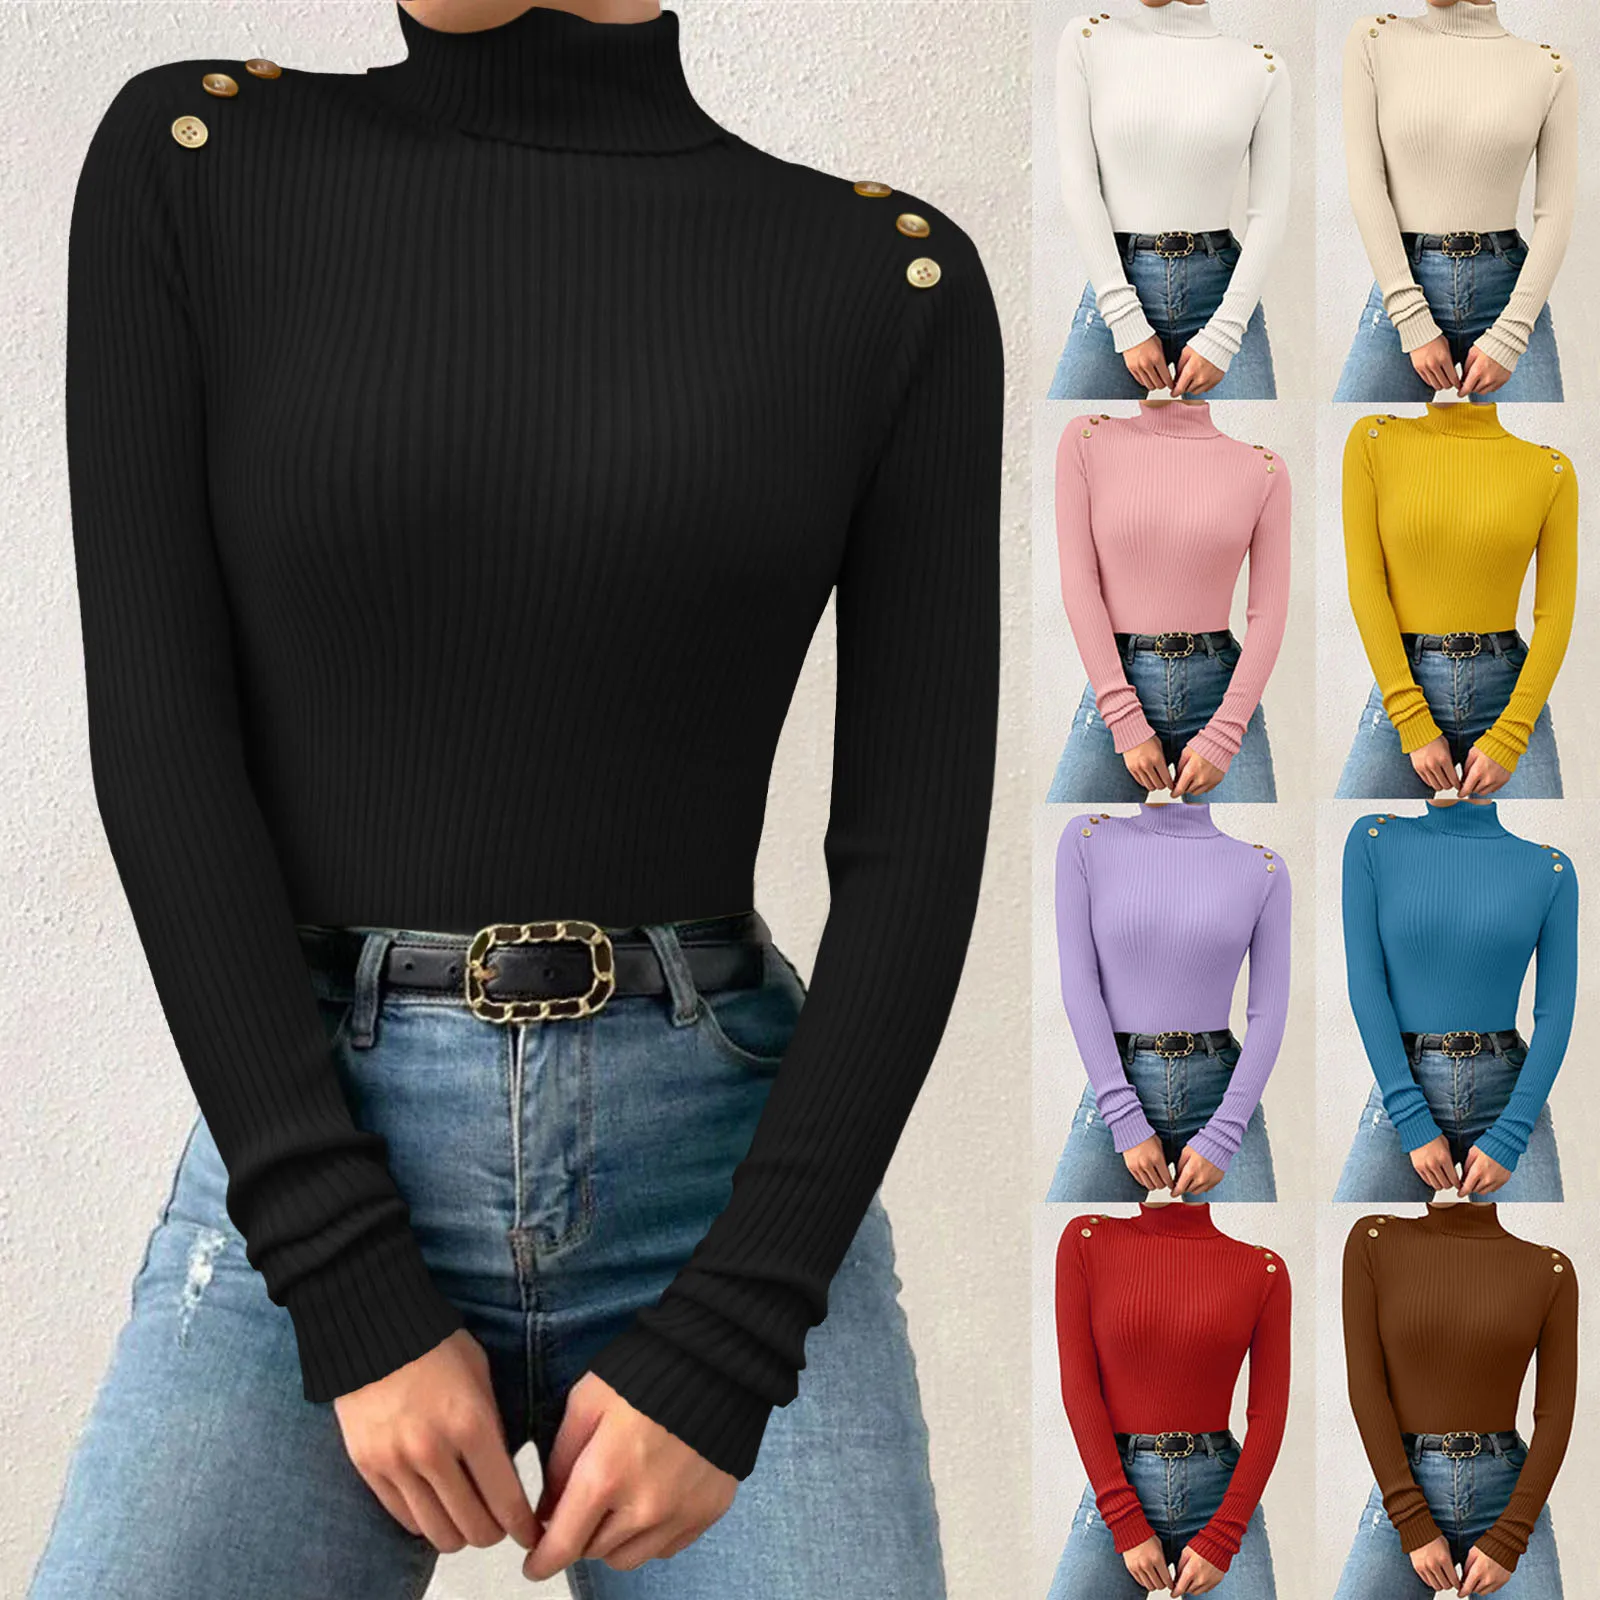 

Women Autumn And Winter Solid Color Turtleneck Bottoming Tops Long Sleeve Button Decorated Warm Slimming Stretch Knitwear Tops